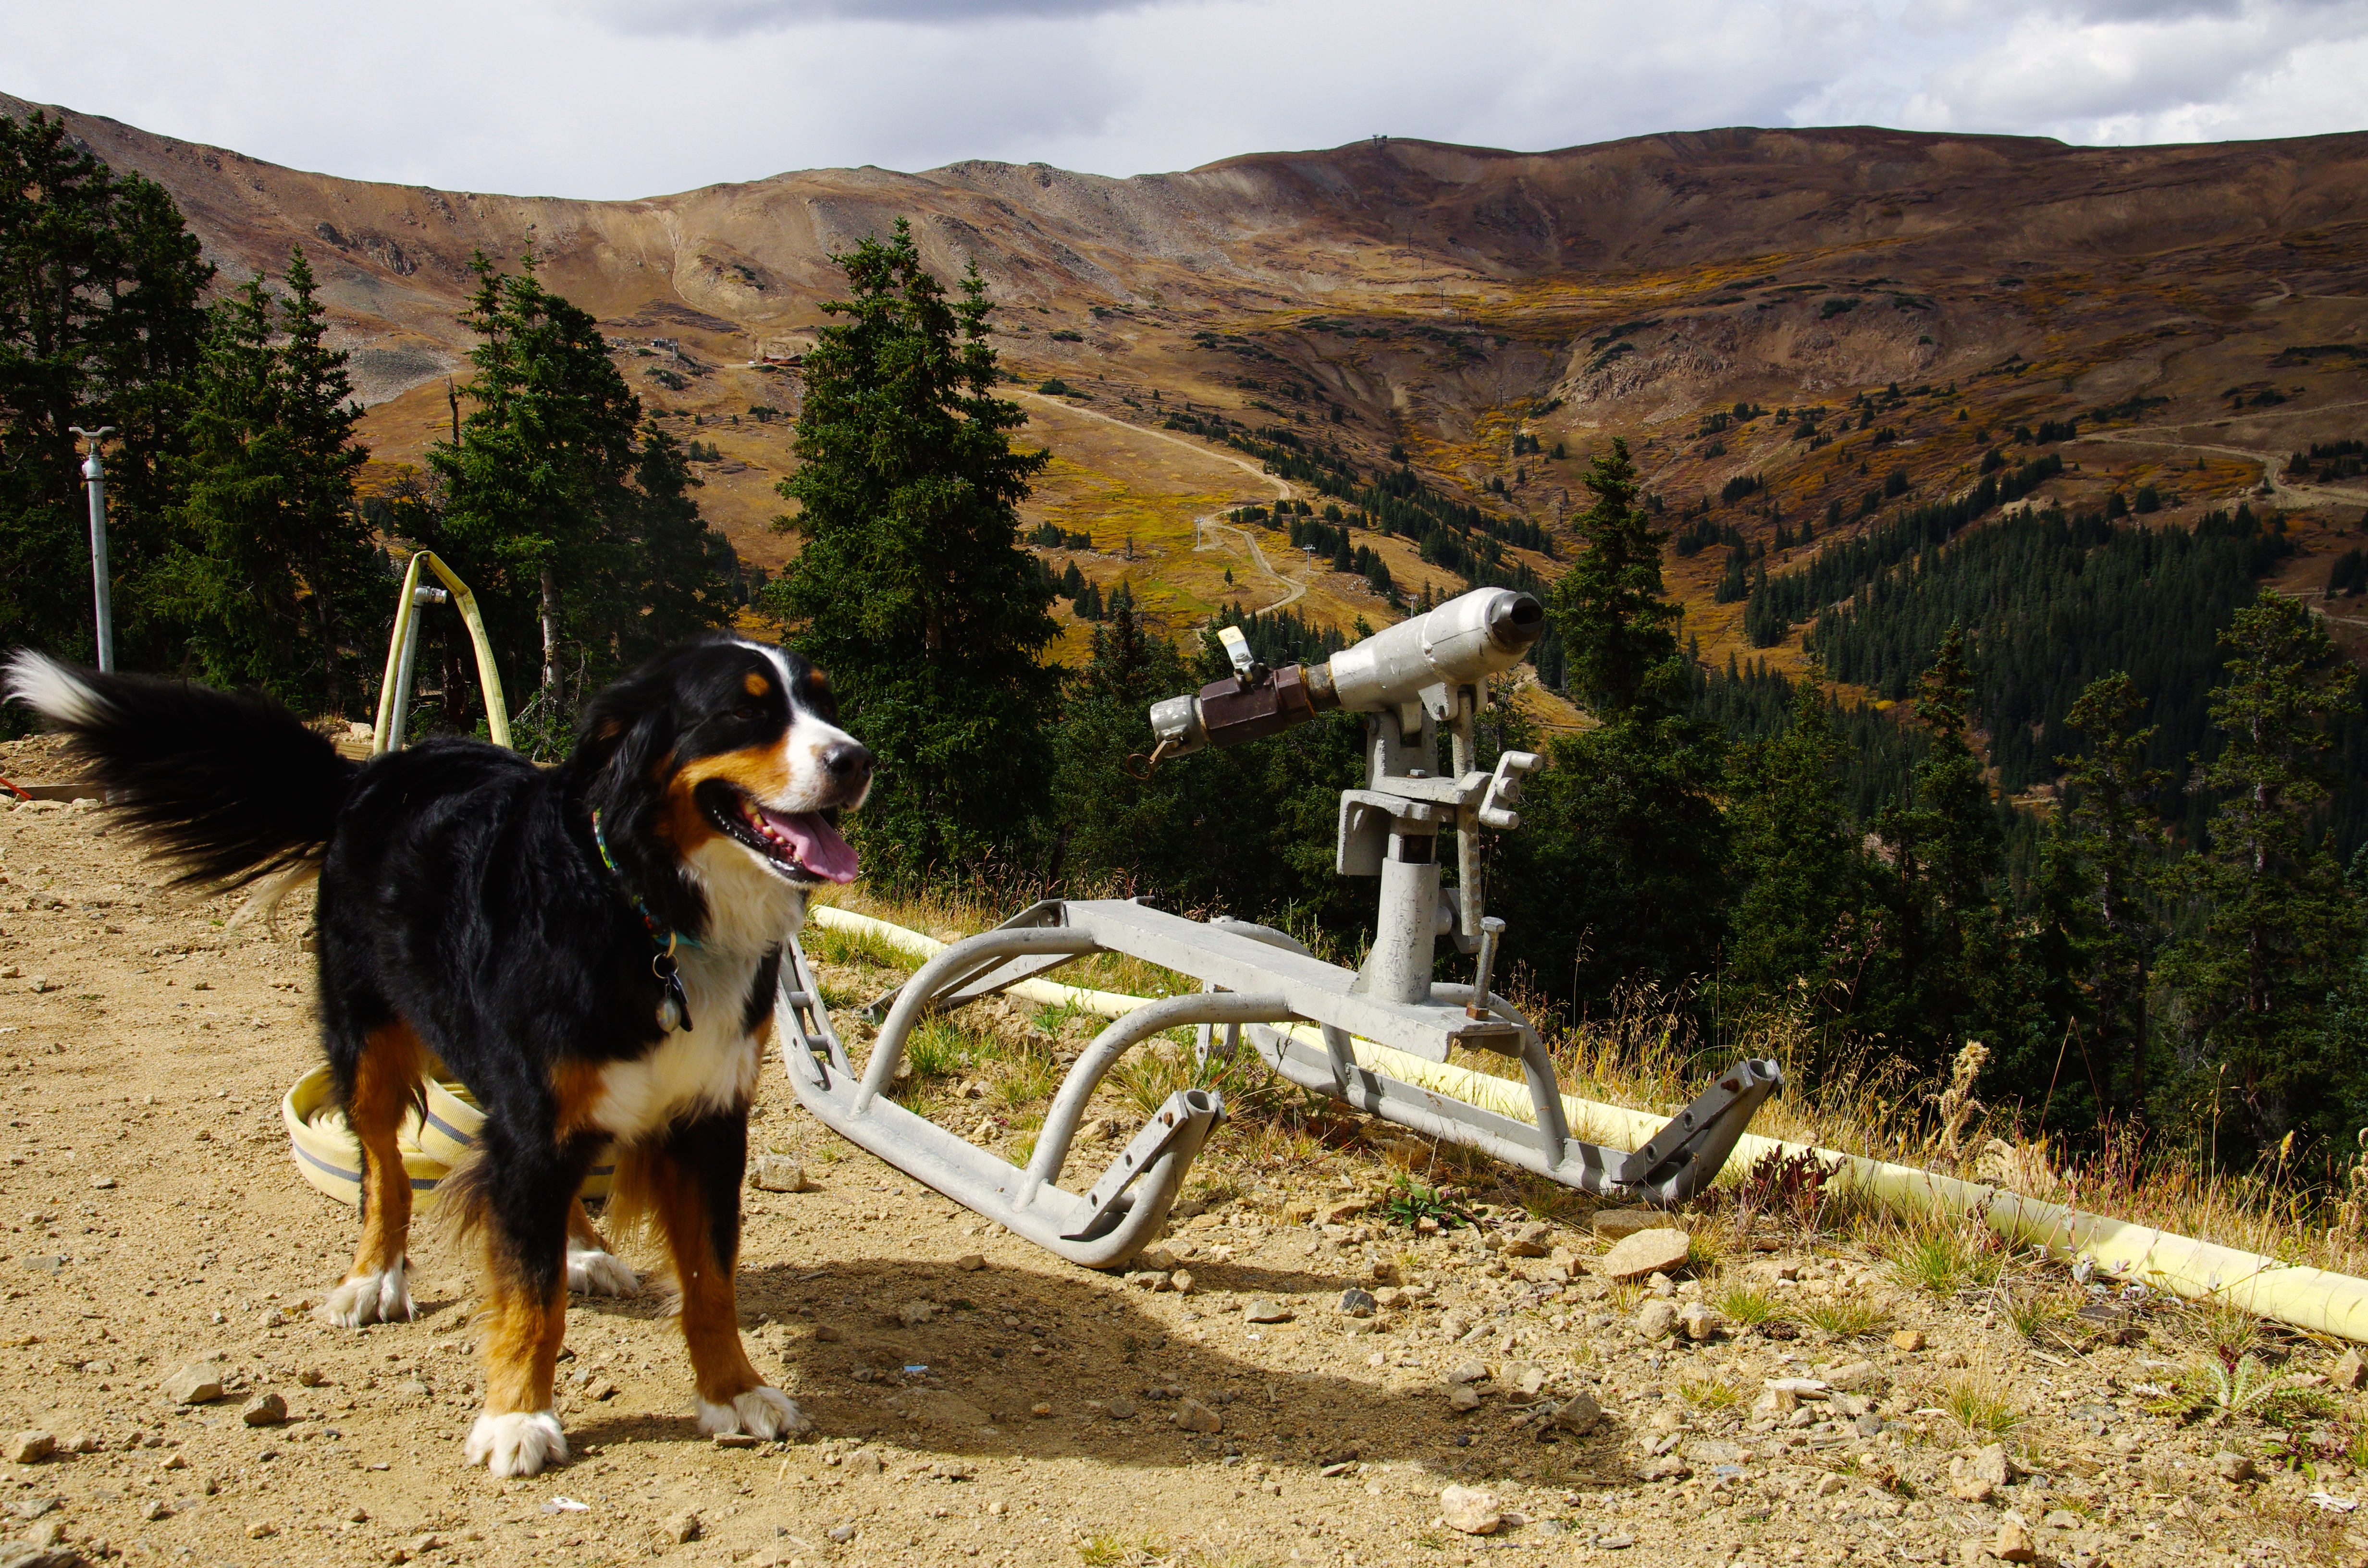 My assistant Toby checking out the snow guns on October 1st, 2015." - Loveland snowmaking crew